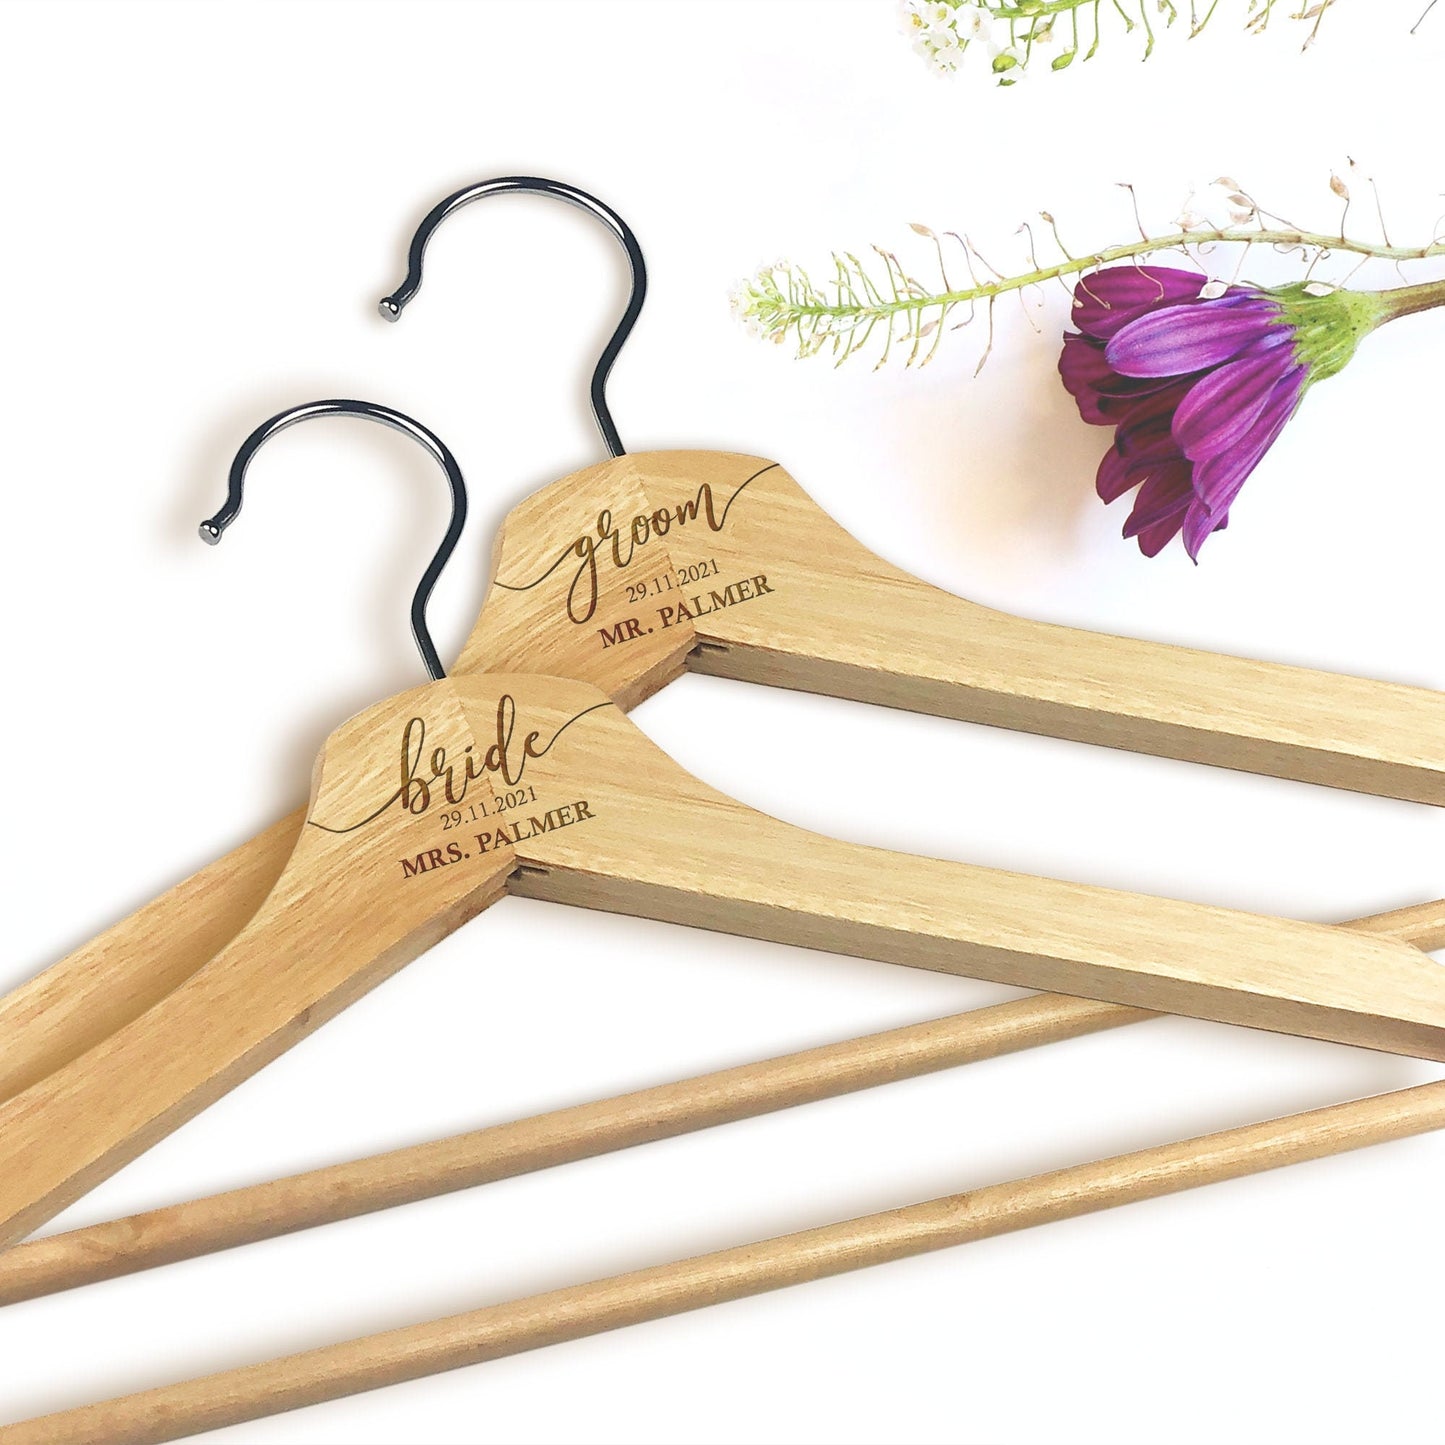 Set of 2 Personalised Engraved Wooden Bridal Dress & Coat Hangers for Bride and Groom | Wedding Day Gift | Custom Names Date